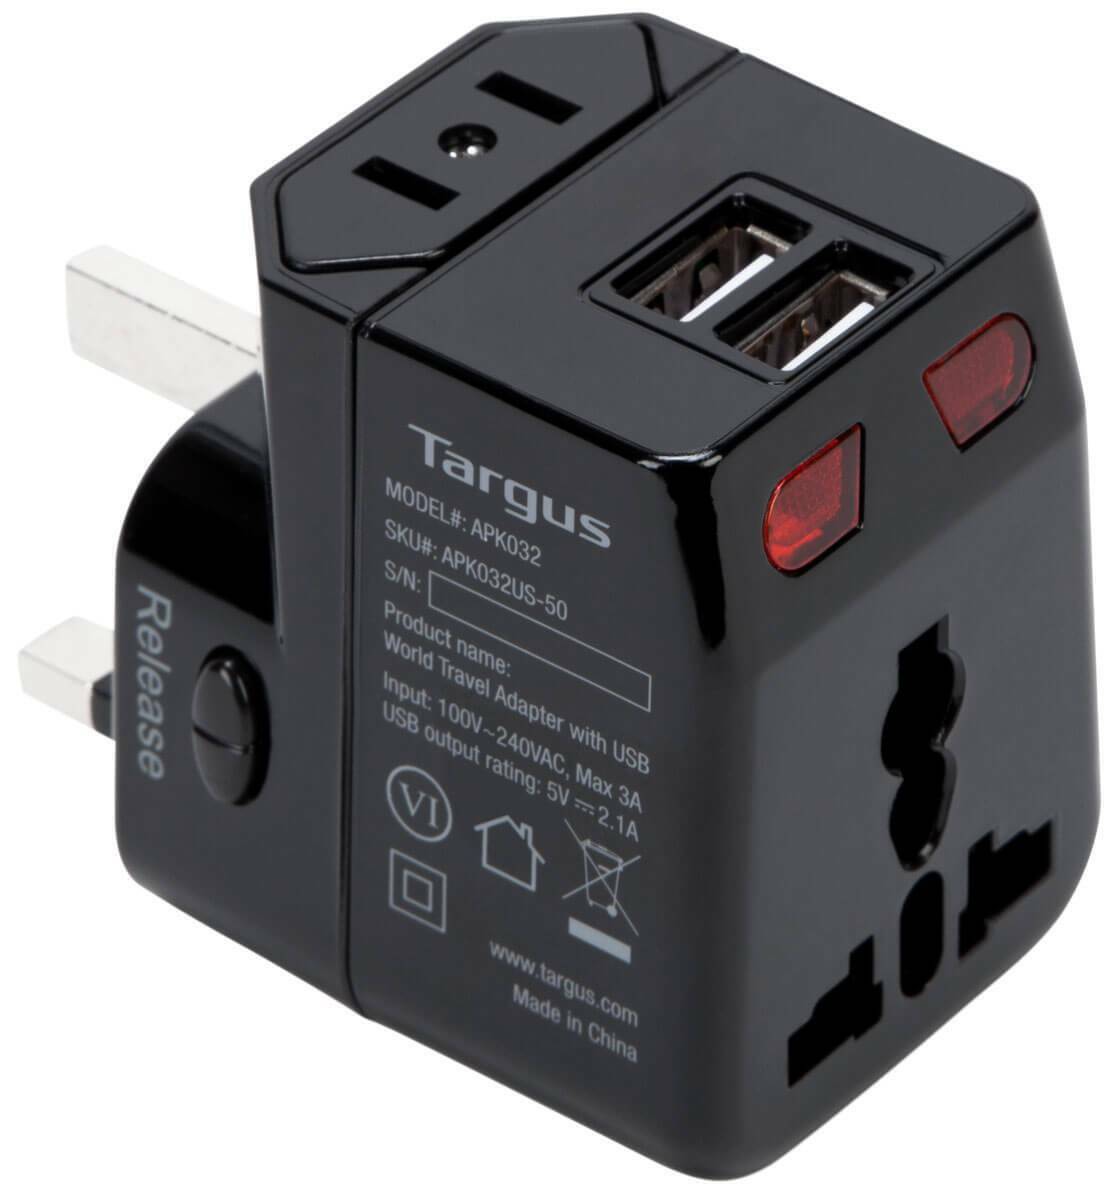 Targus World Travel Power Adapter with Dual USB Charging Ports - APK032US